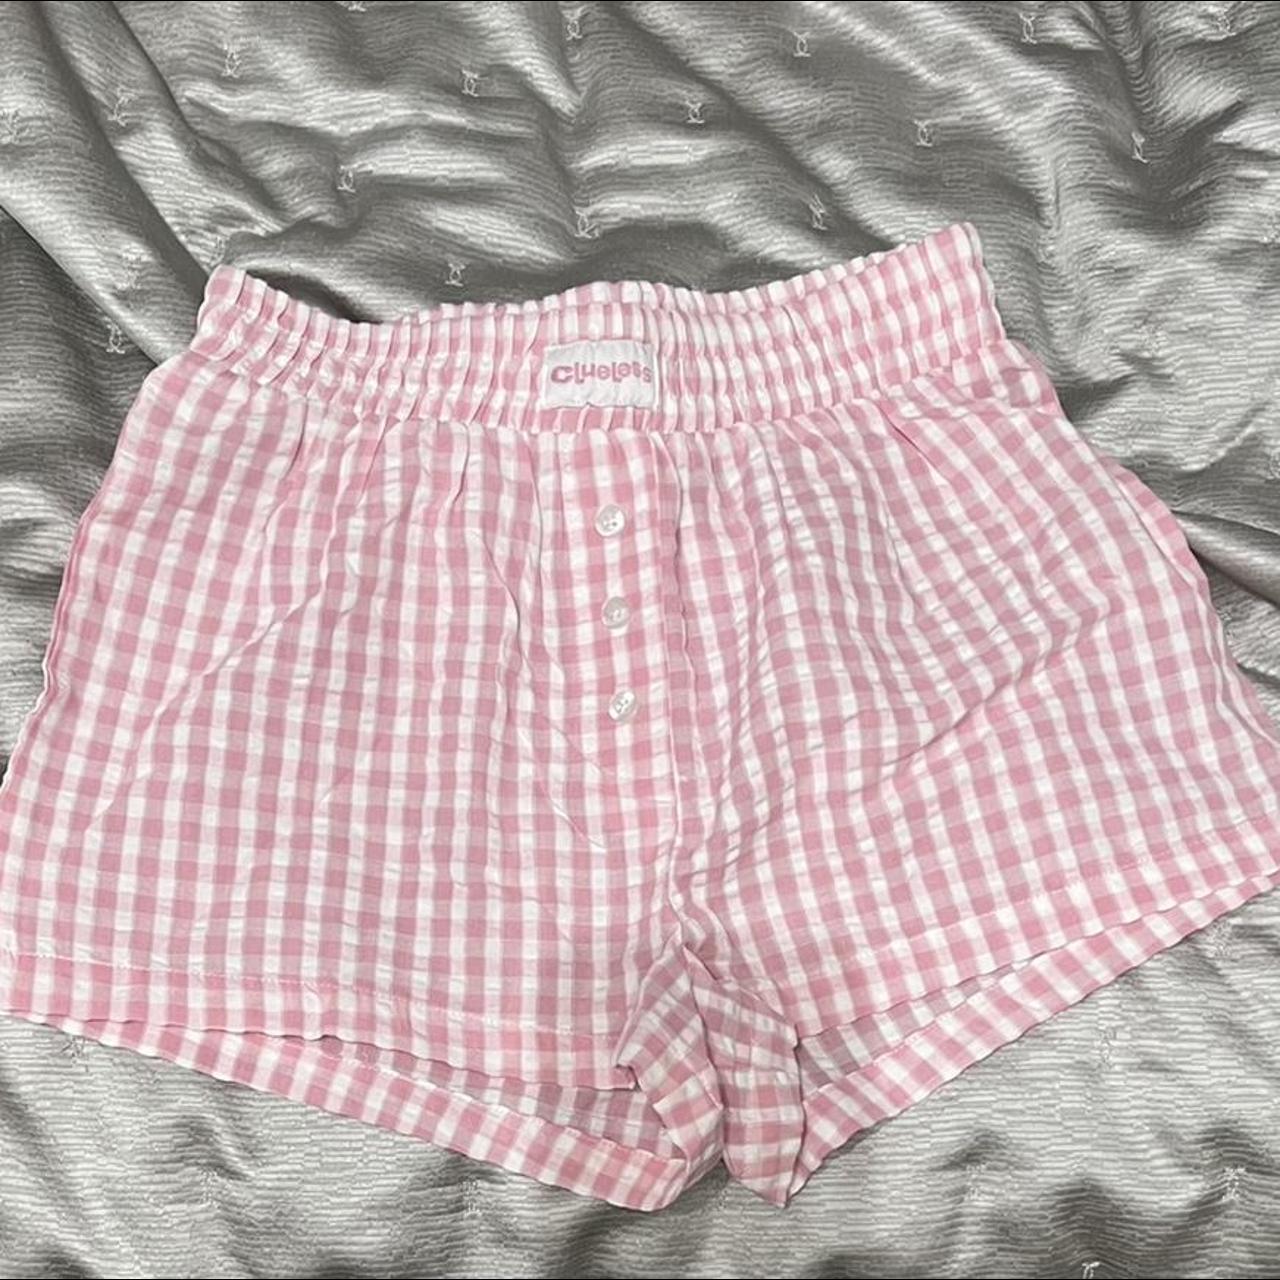 Primark Women's Pink and White Shorts | Depop